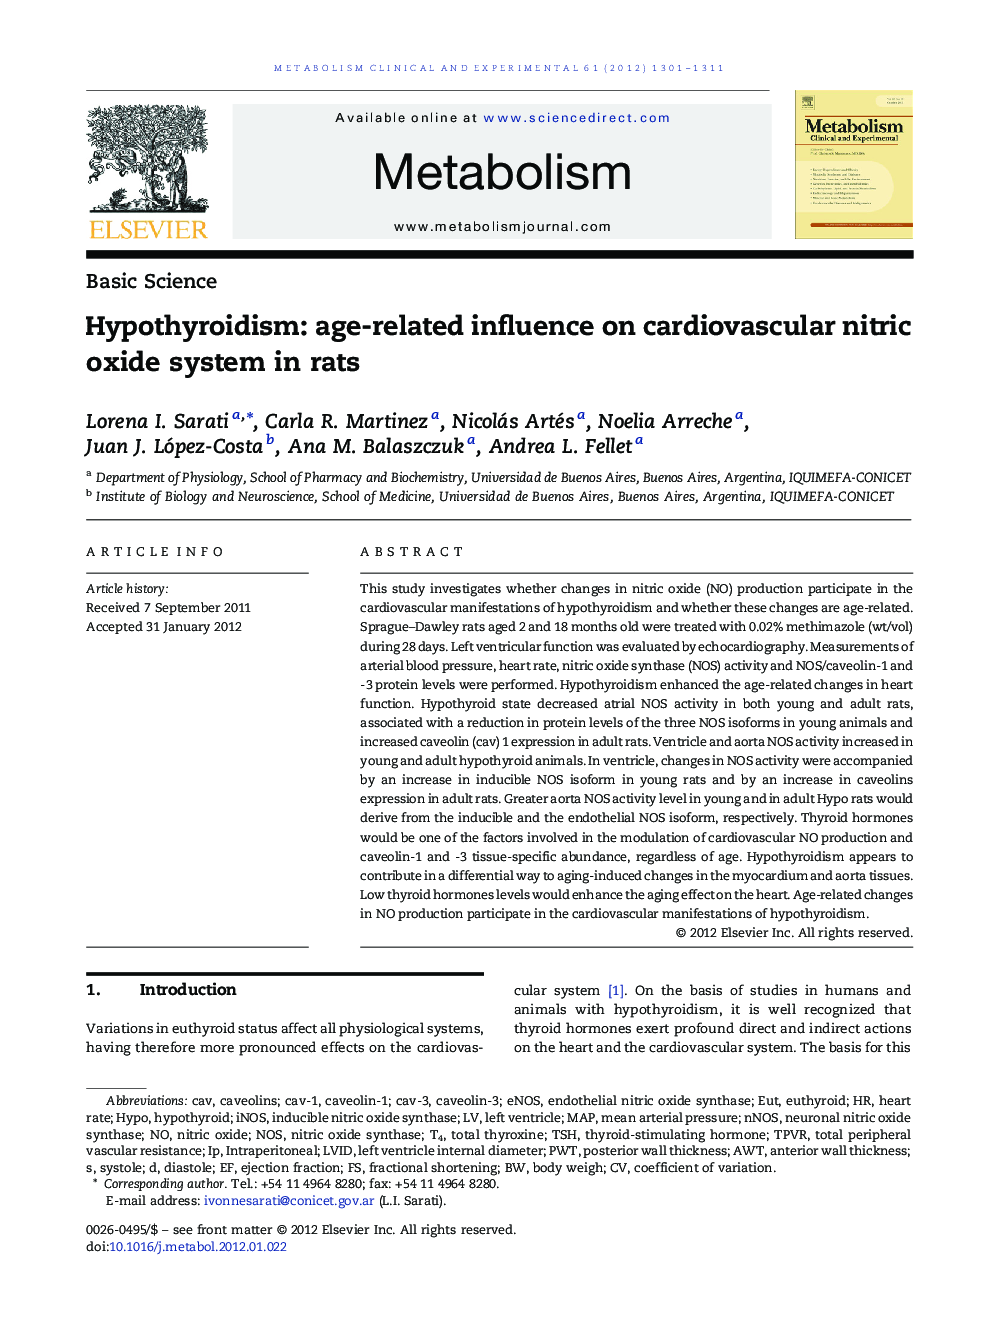 Hypothyroidism: age-related influence on cardiovascular nitric oxide system in rats